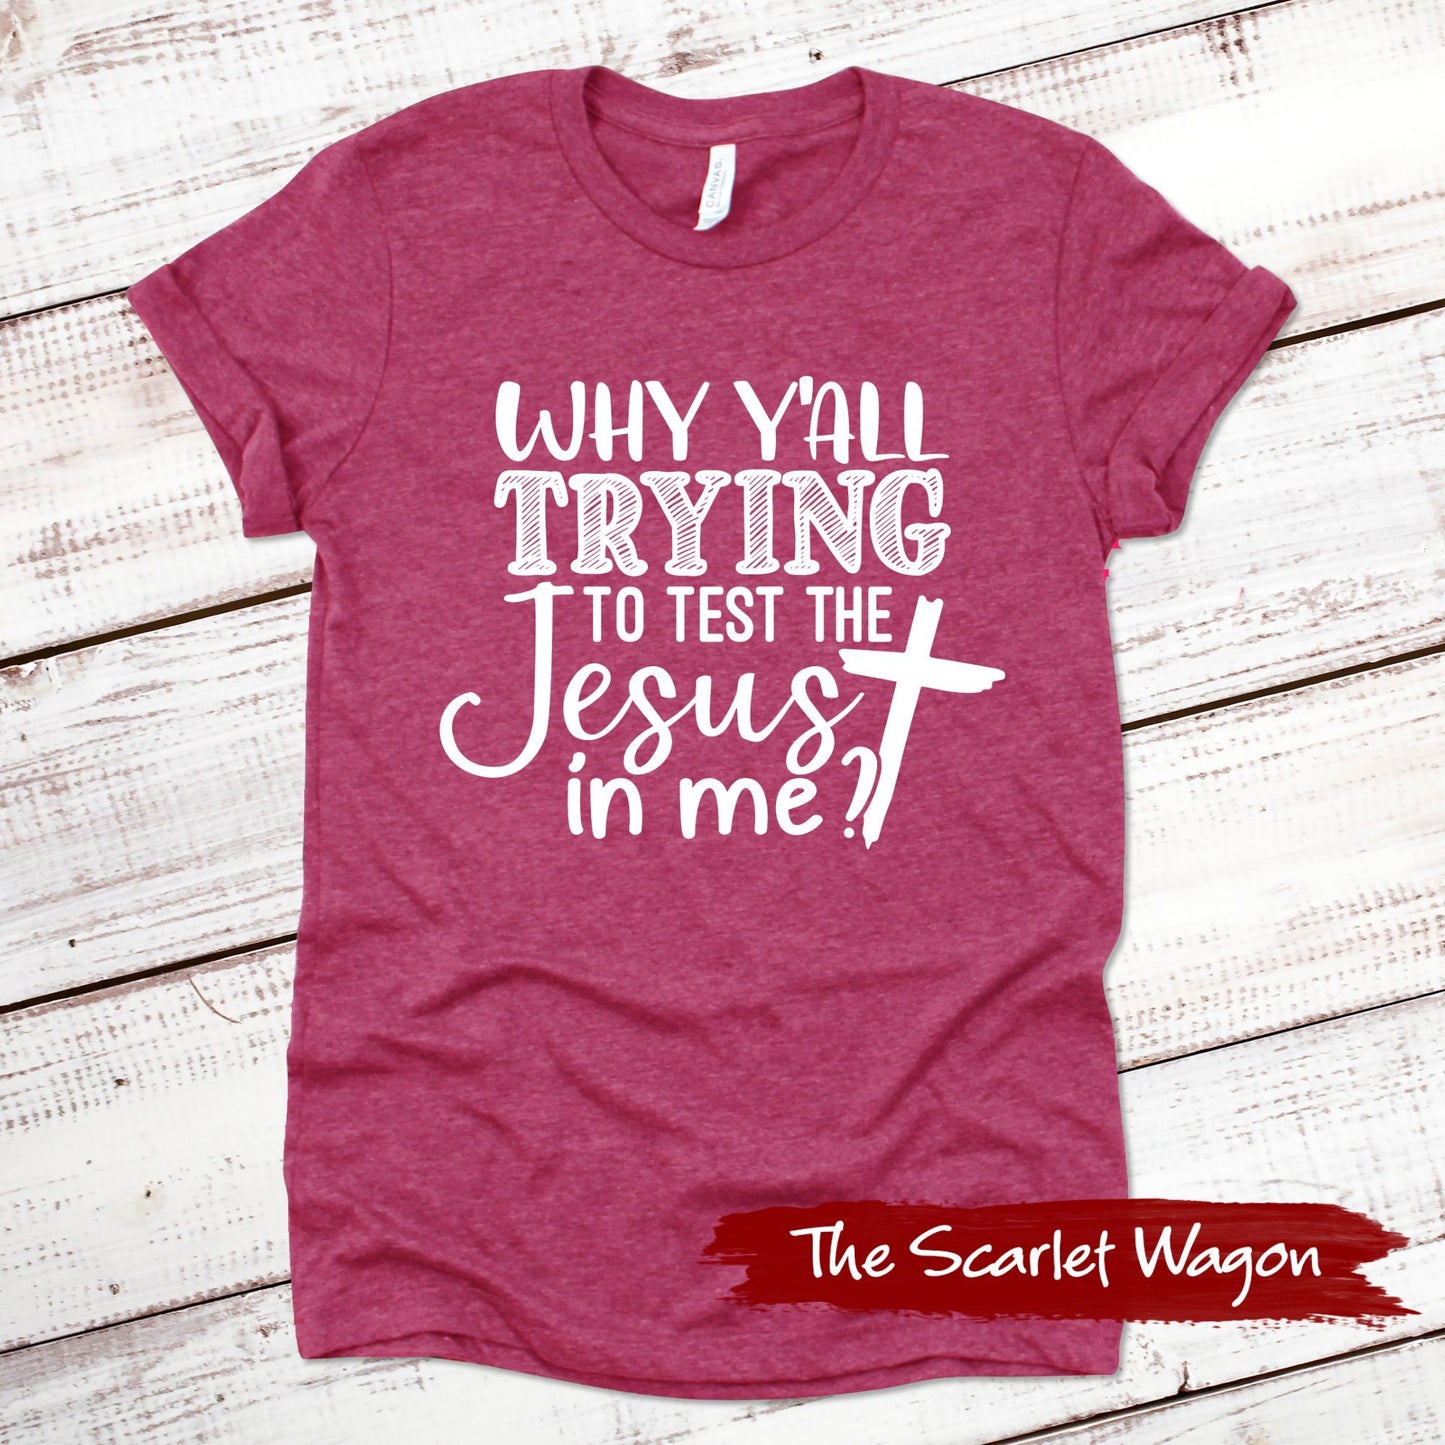 Why Y'all Trying to Test the Jesus in Me Funny Shirt Scarlet Wagon Heather Raspberry XS 